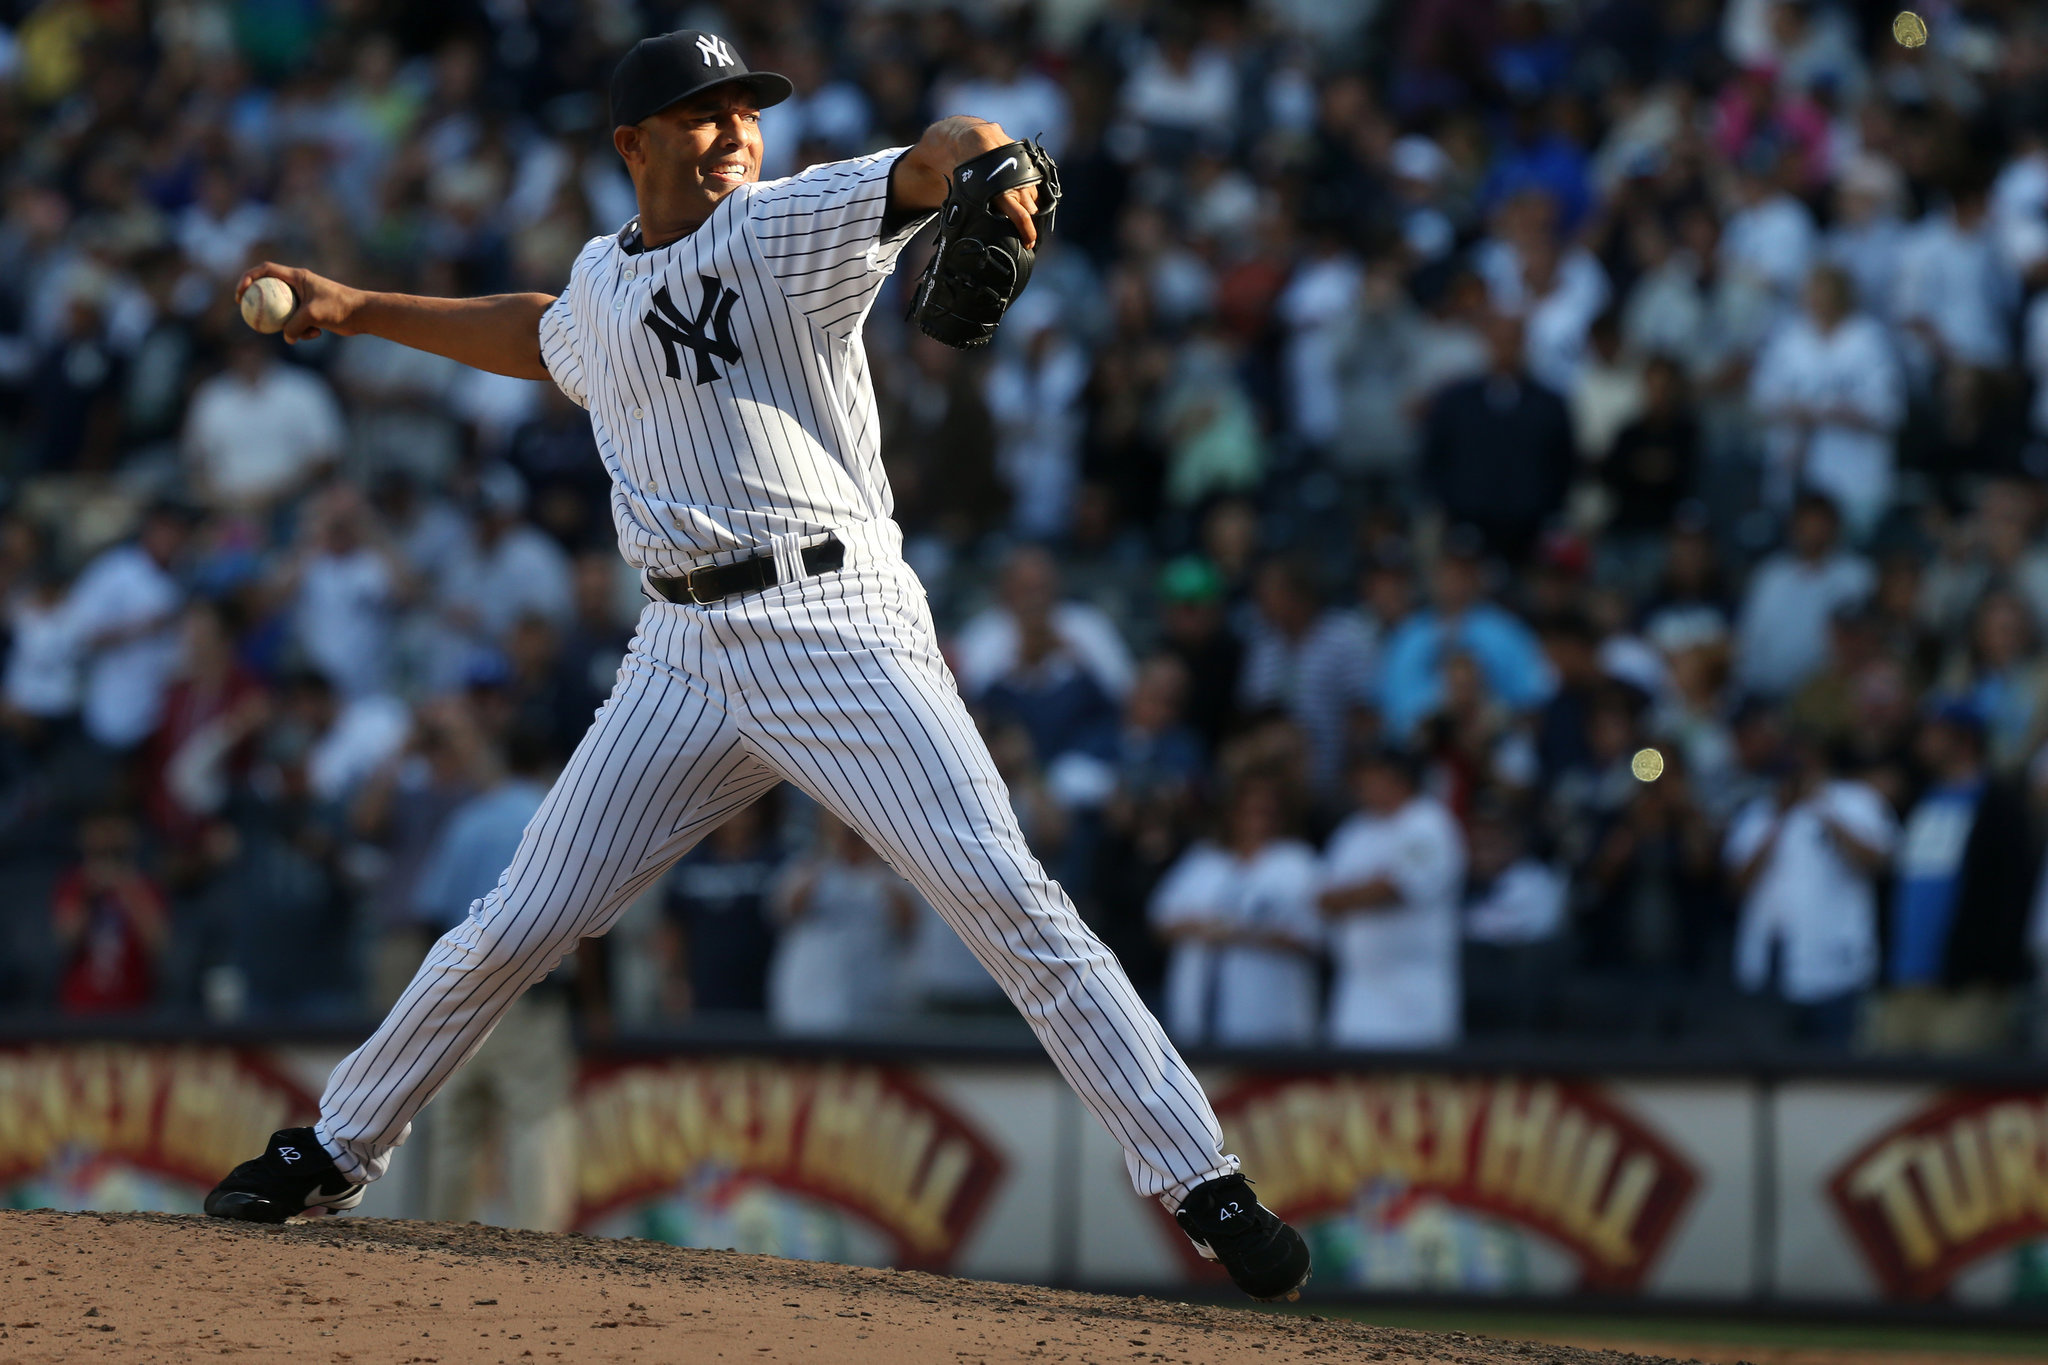 Mariano Rivera's cutter pitch, Zen-like performance, New York Times feature, Pitching mastery, 2050x1370 HD Desktop